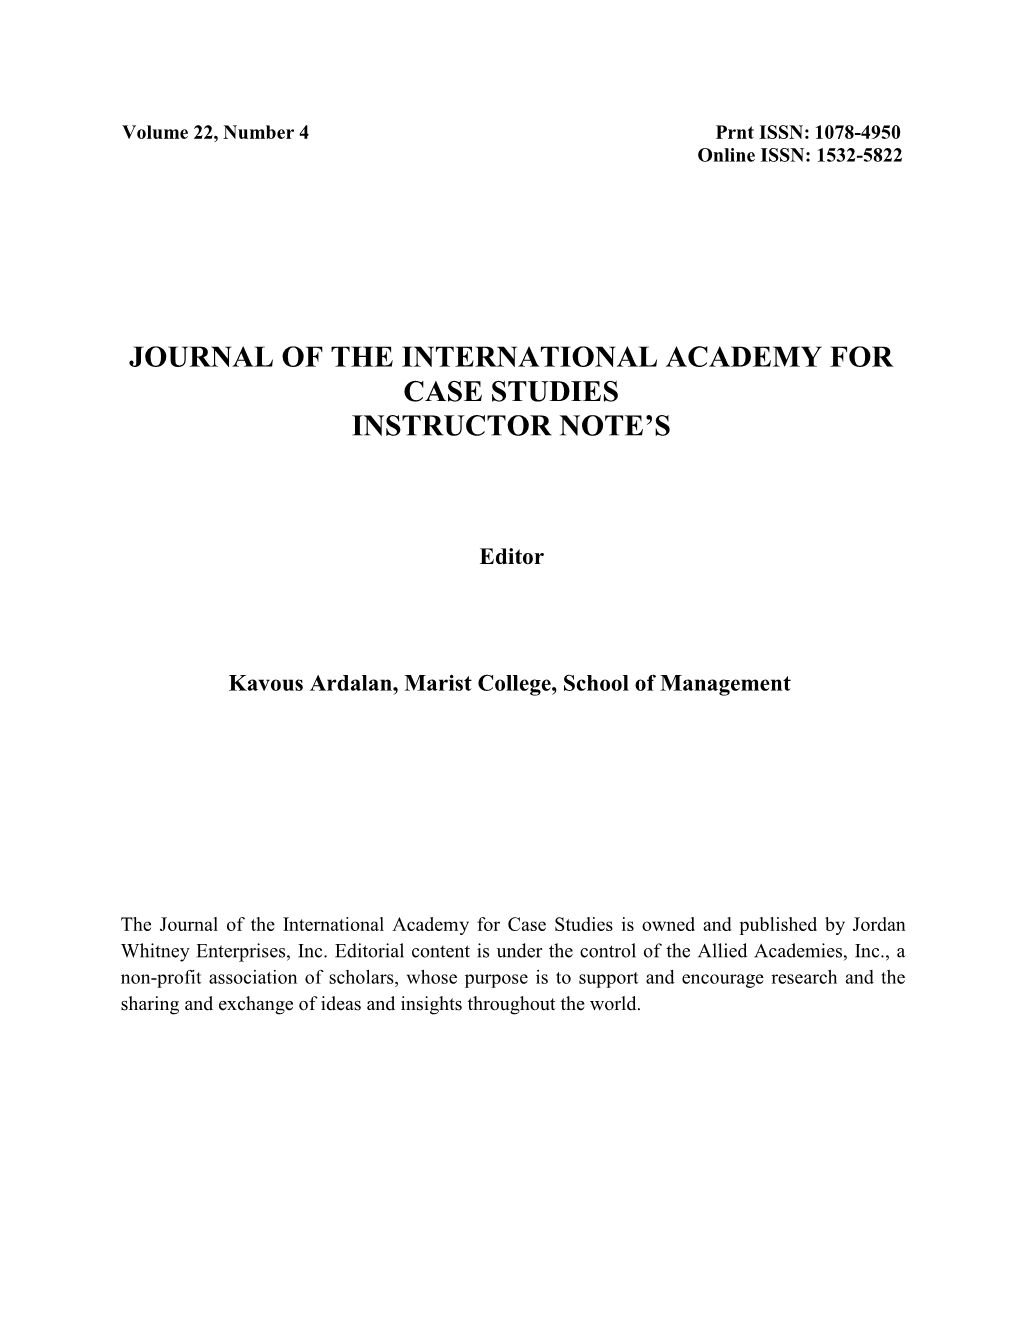 Journal of the International Academy for Case Studies Instructor Note’S